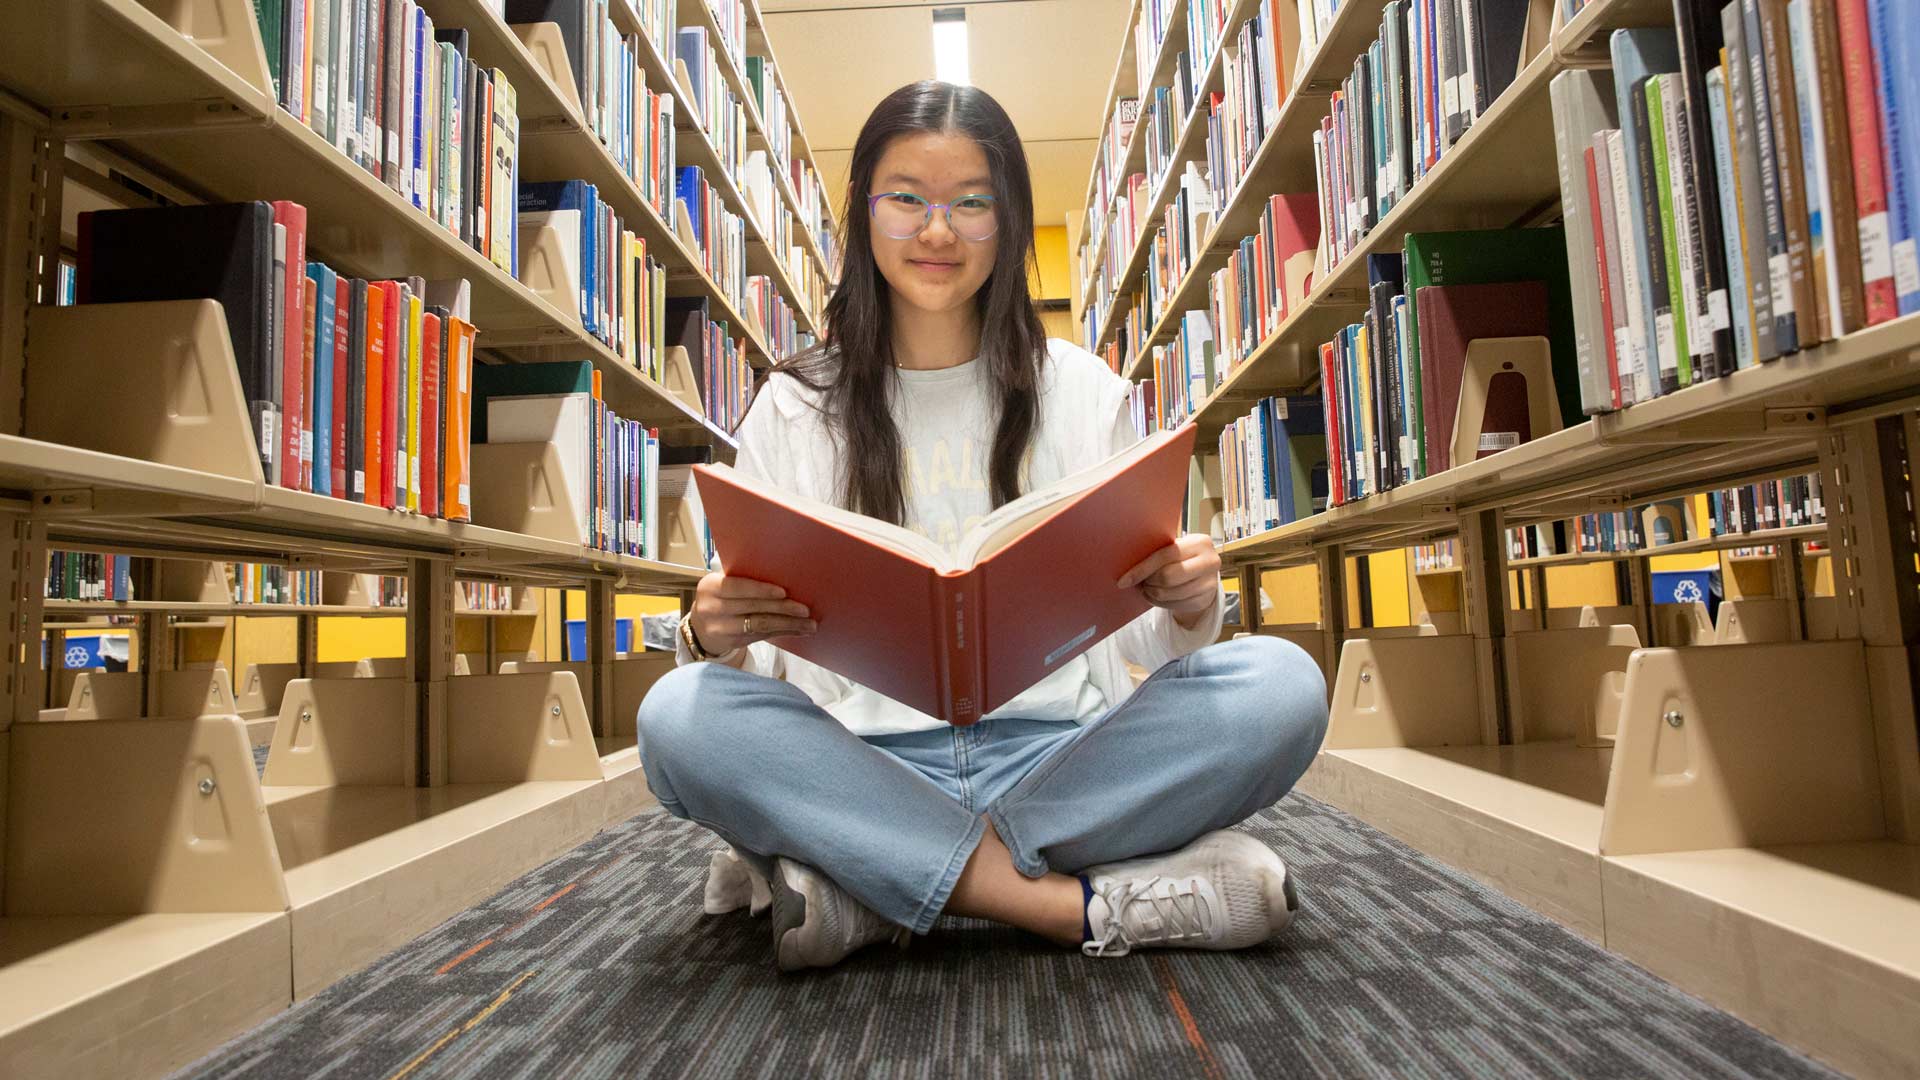 A student reads a book in the library